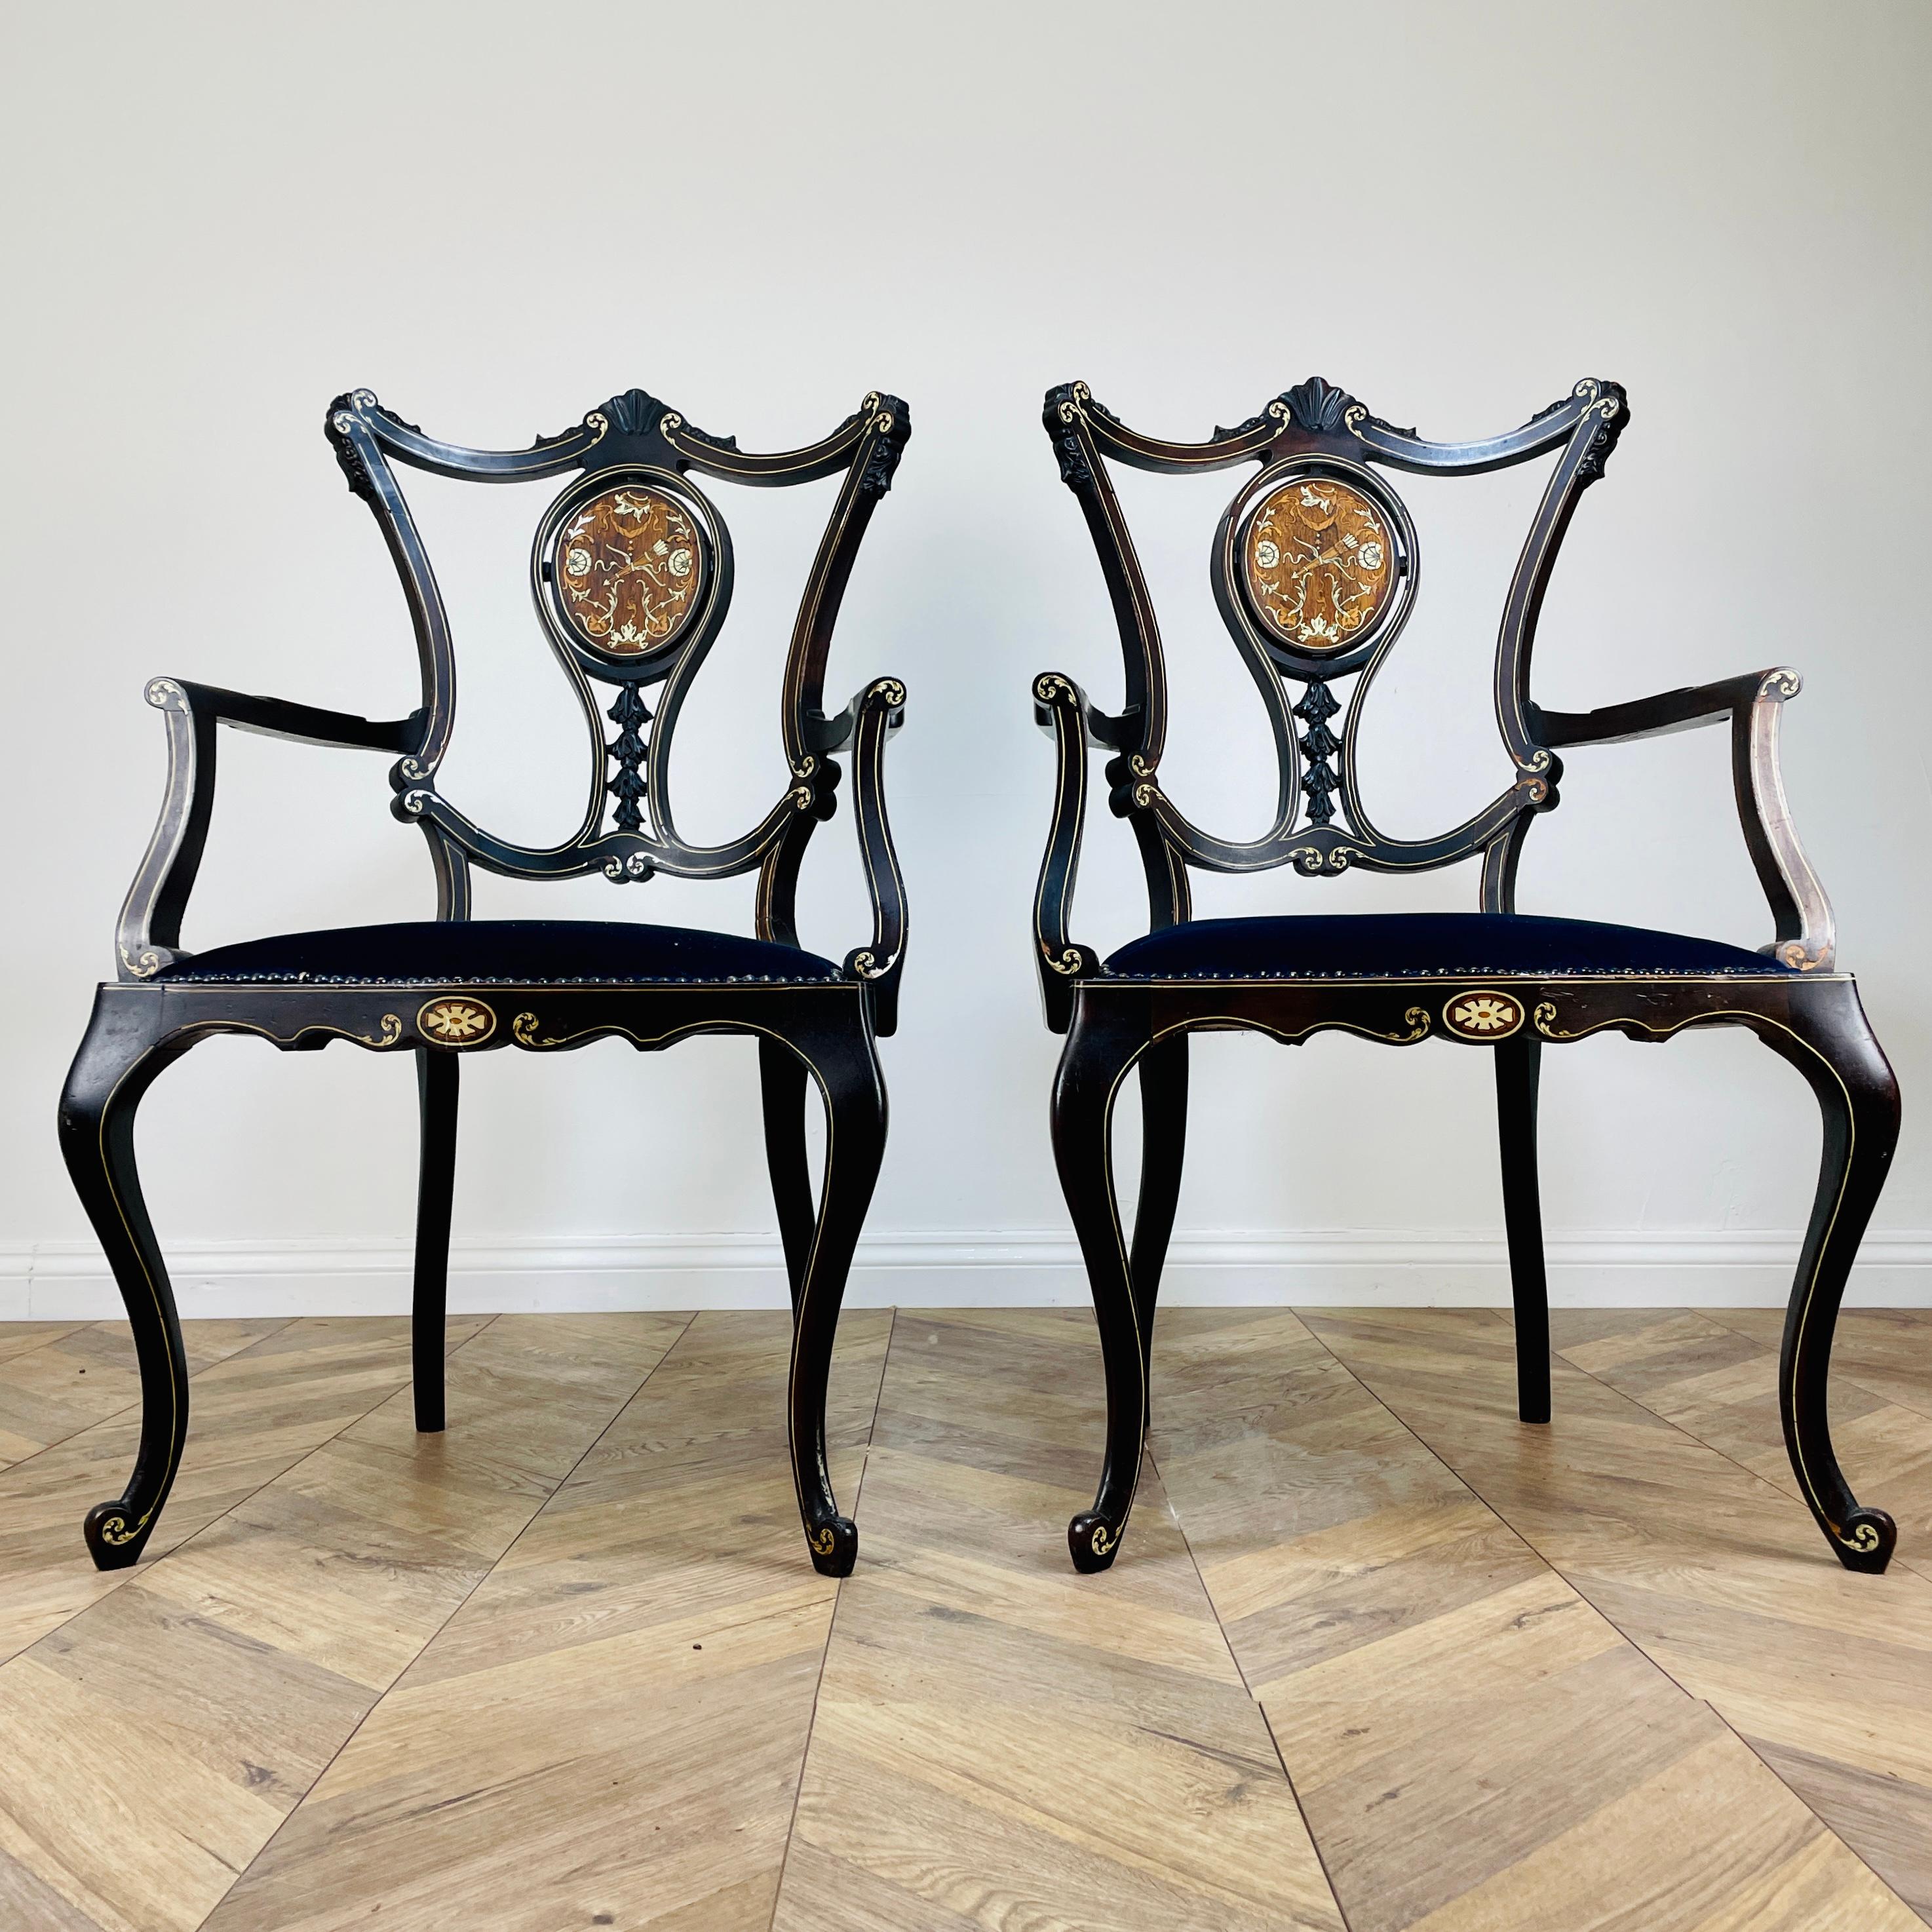 Set of 2, Antique Ornate French Armchairs, Set of 2, circa late 19th Century.

The chairs have a lovely detailing and in good condition - one chair does have small repair the back rest, as pictured, but this does not effect its look or usage!

The